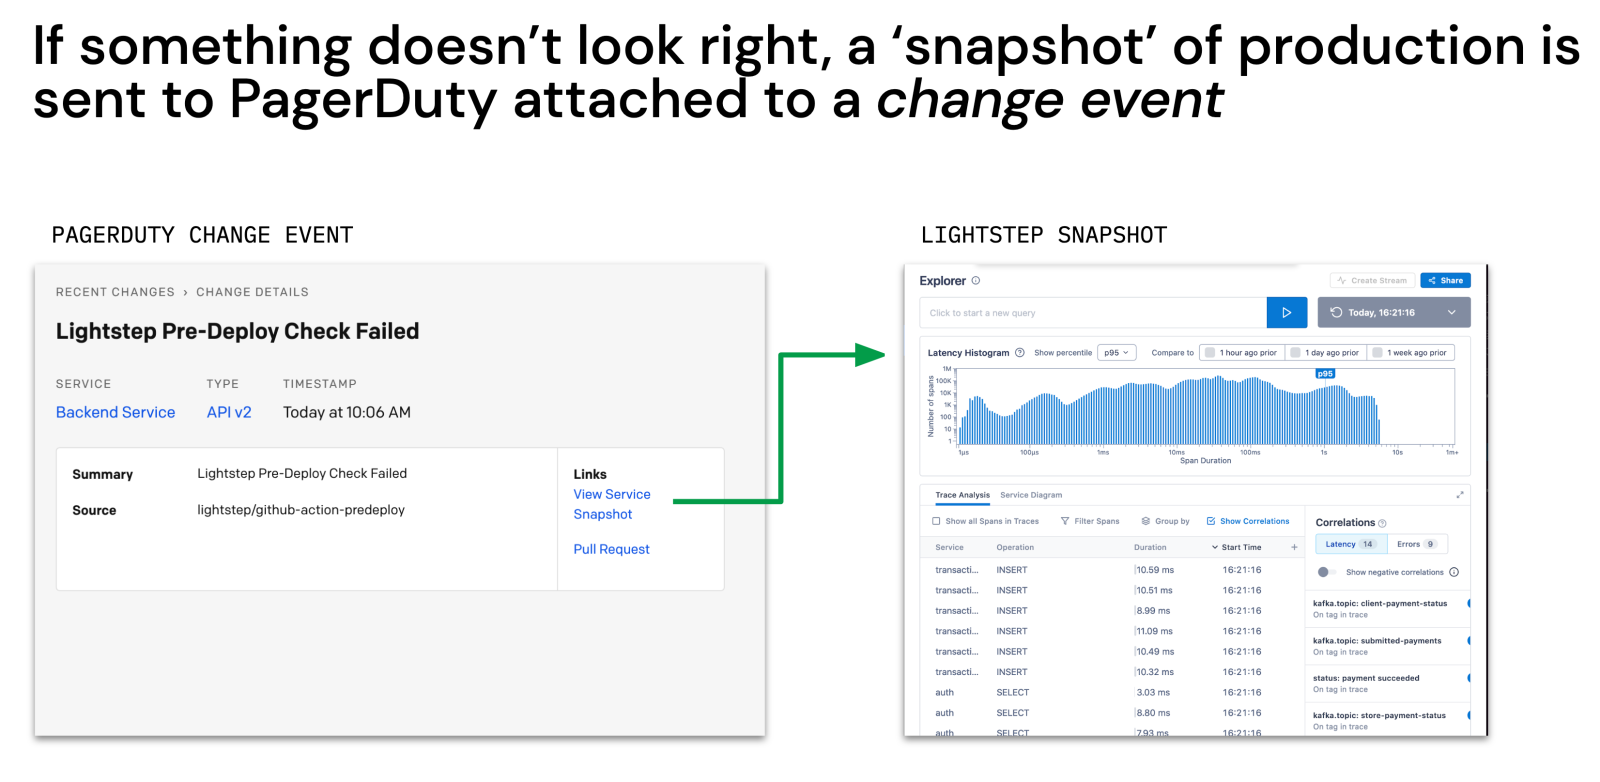 PagerDuty to Lightstep Snapshot